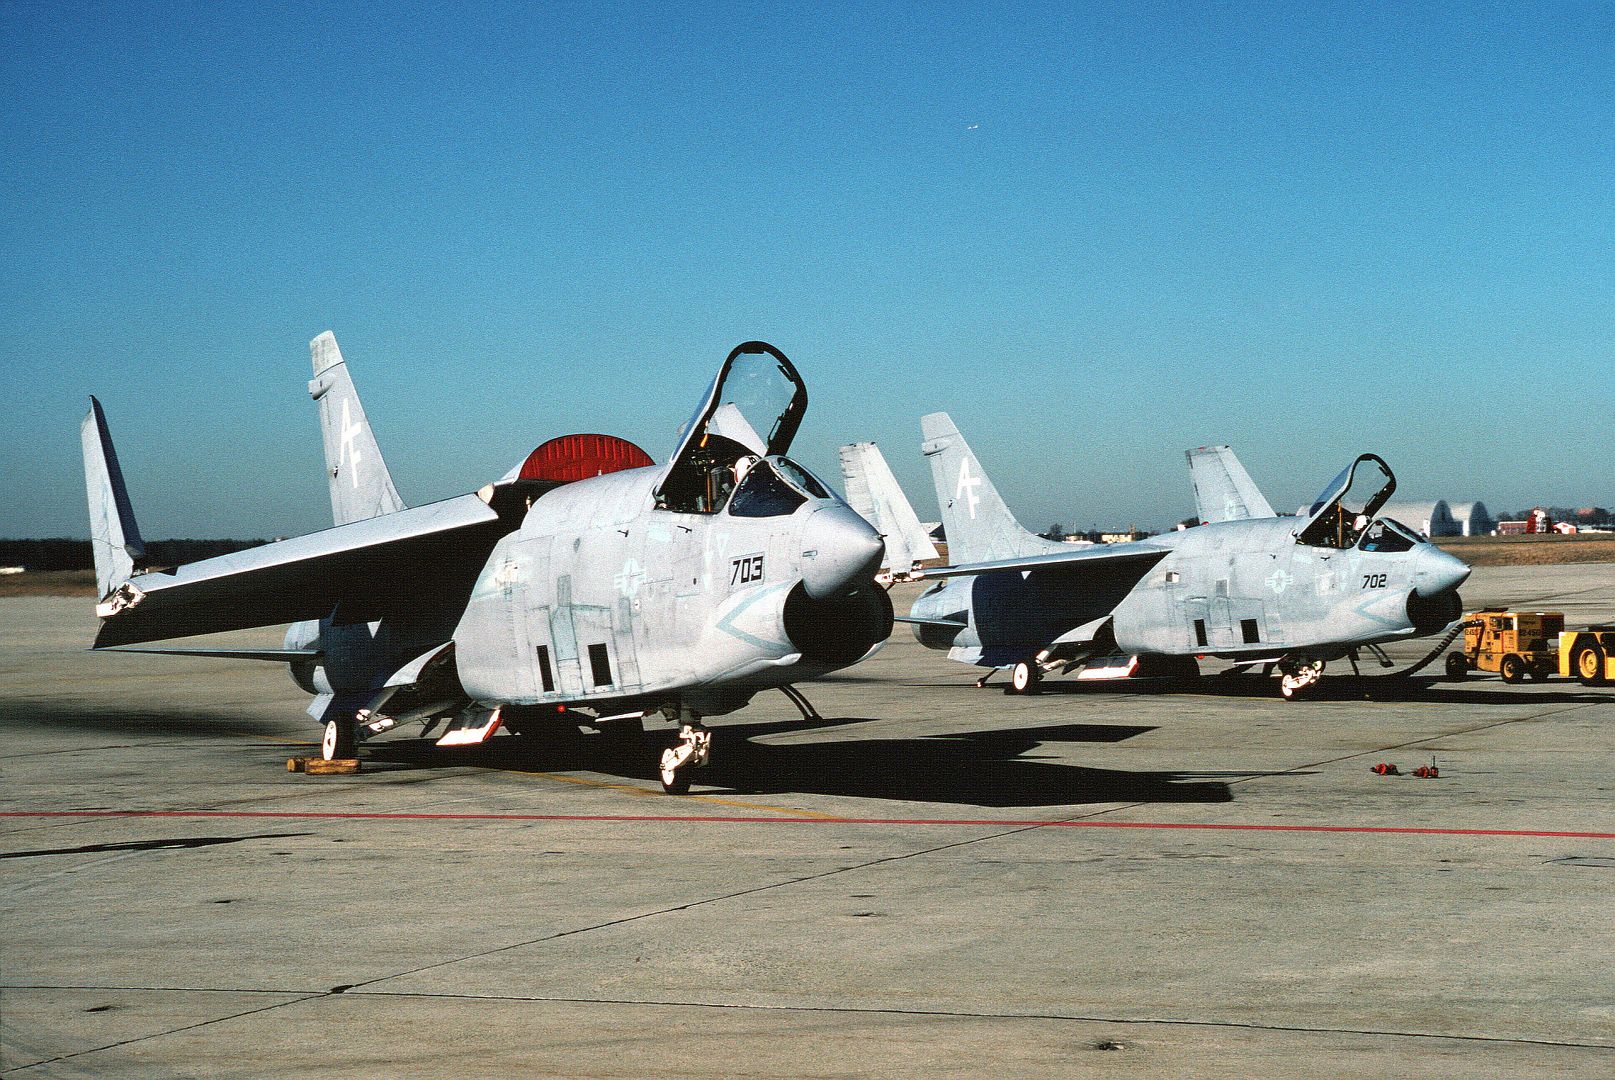 8G Crusader Aircraft Parked On The Flight Line